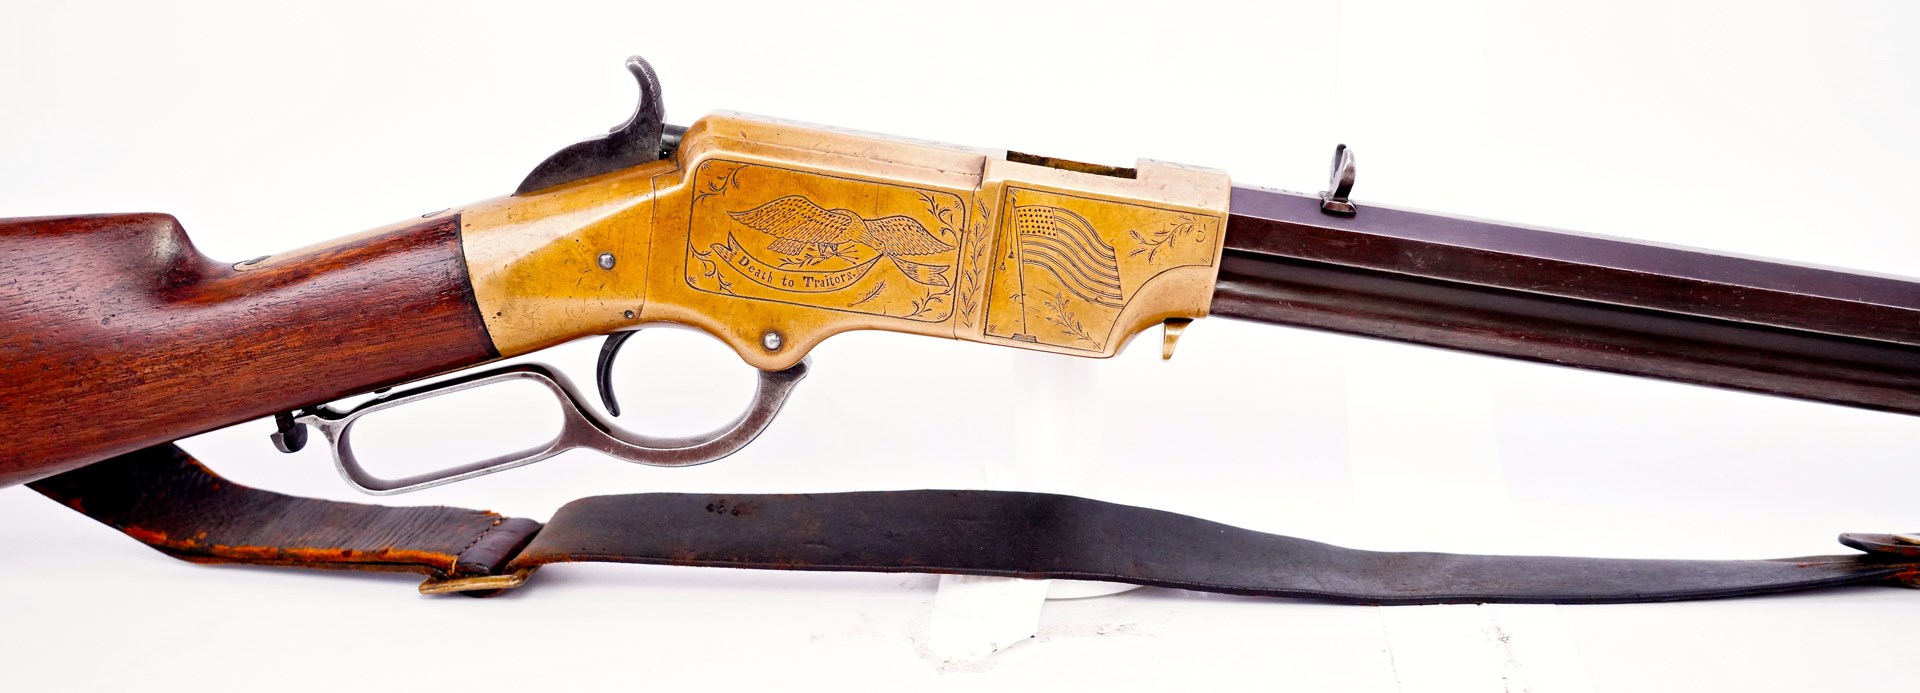 An engraved Civil War-era 7th Illinois 1860 Henry Rifle inscribed: “Death to Traitors.”